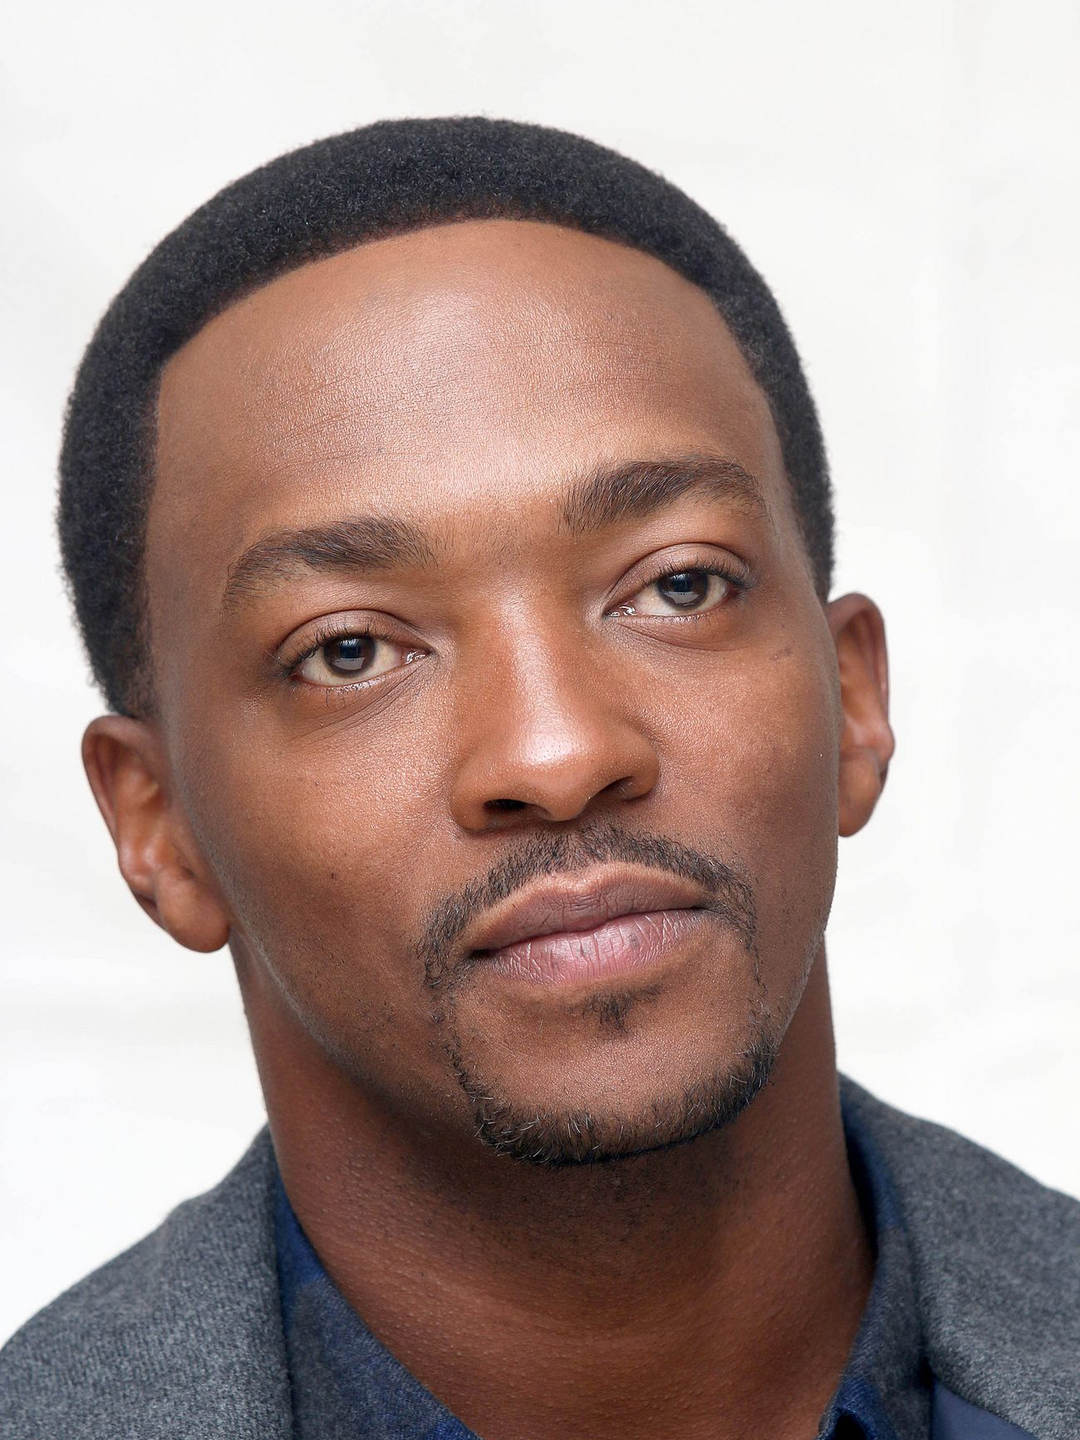 Anthony Mackie in his teens